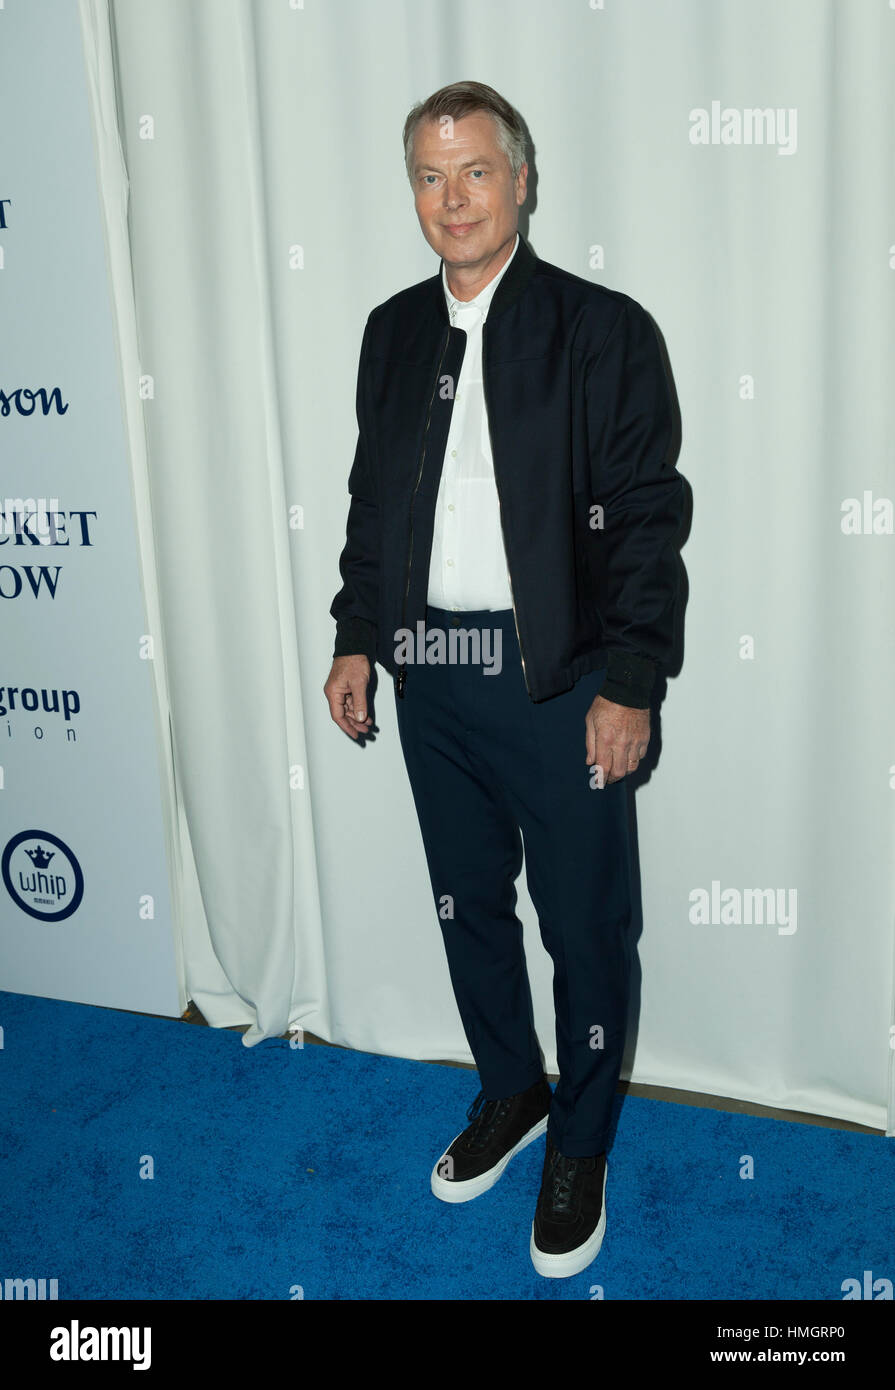 New York, NY USA - February 1, 2017: Richard Johnson attends the blue jacket fashon show in support for prostate cancer awarness during New York Fashion week at Pier 59 Stock Photo